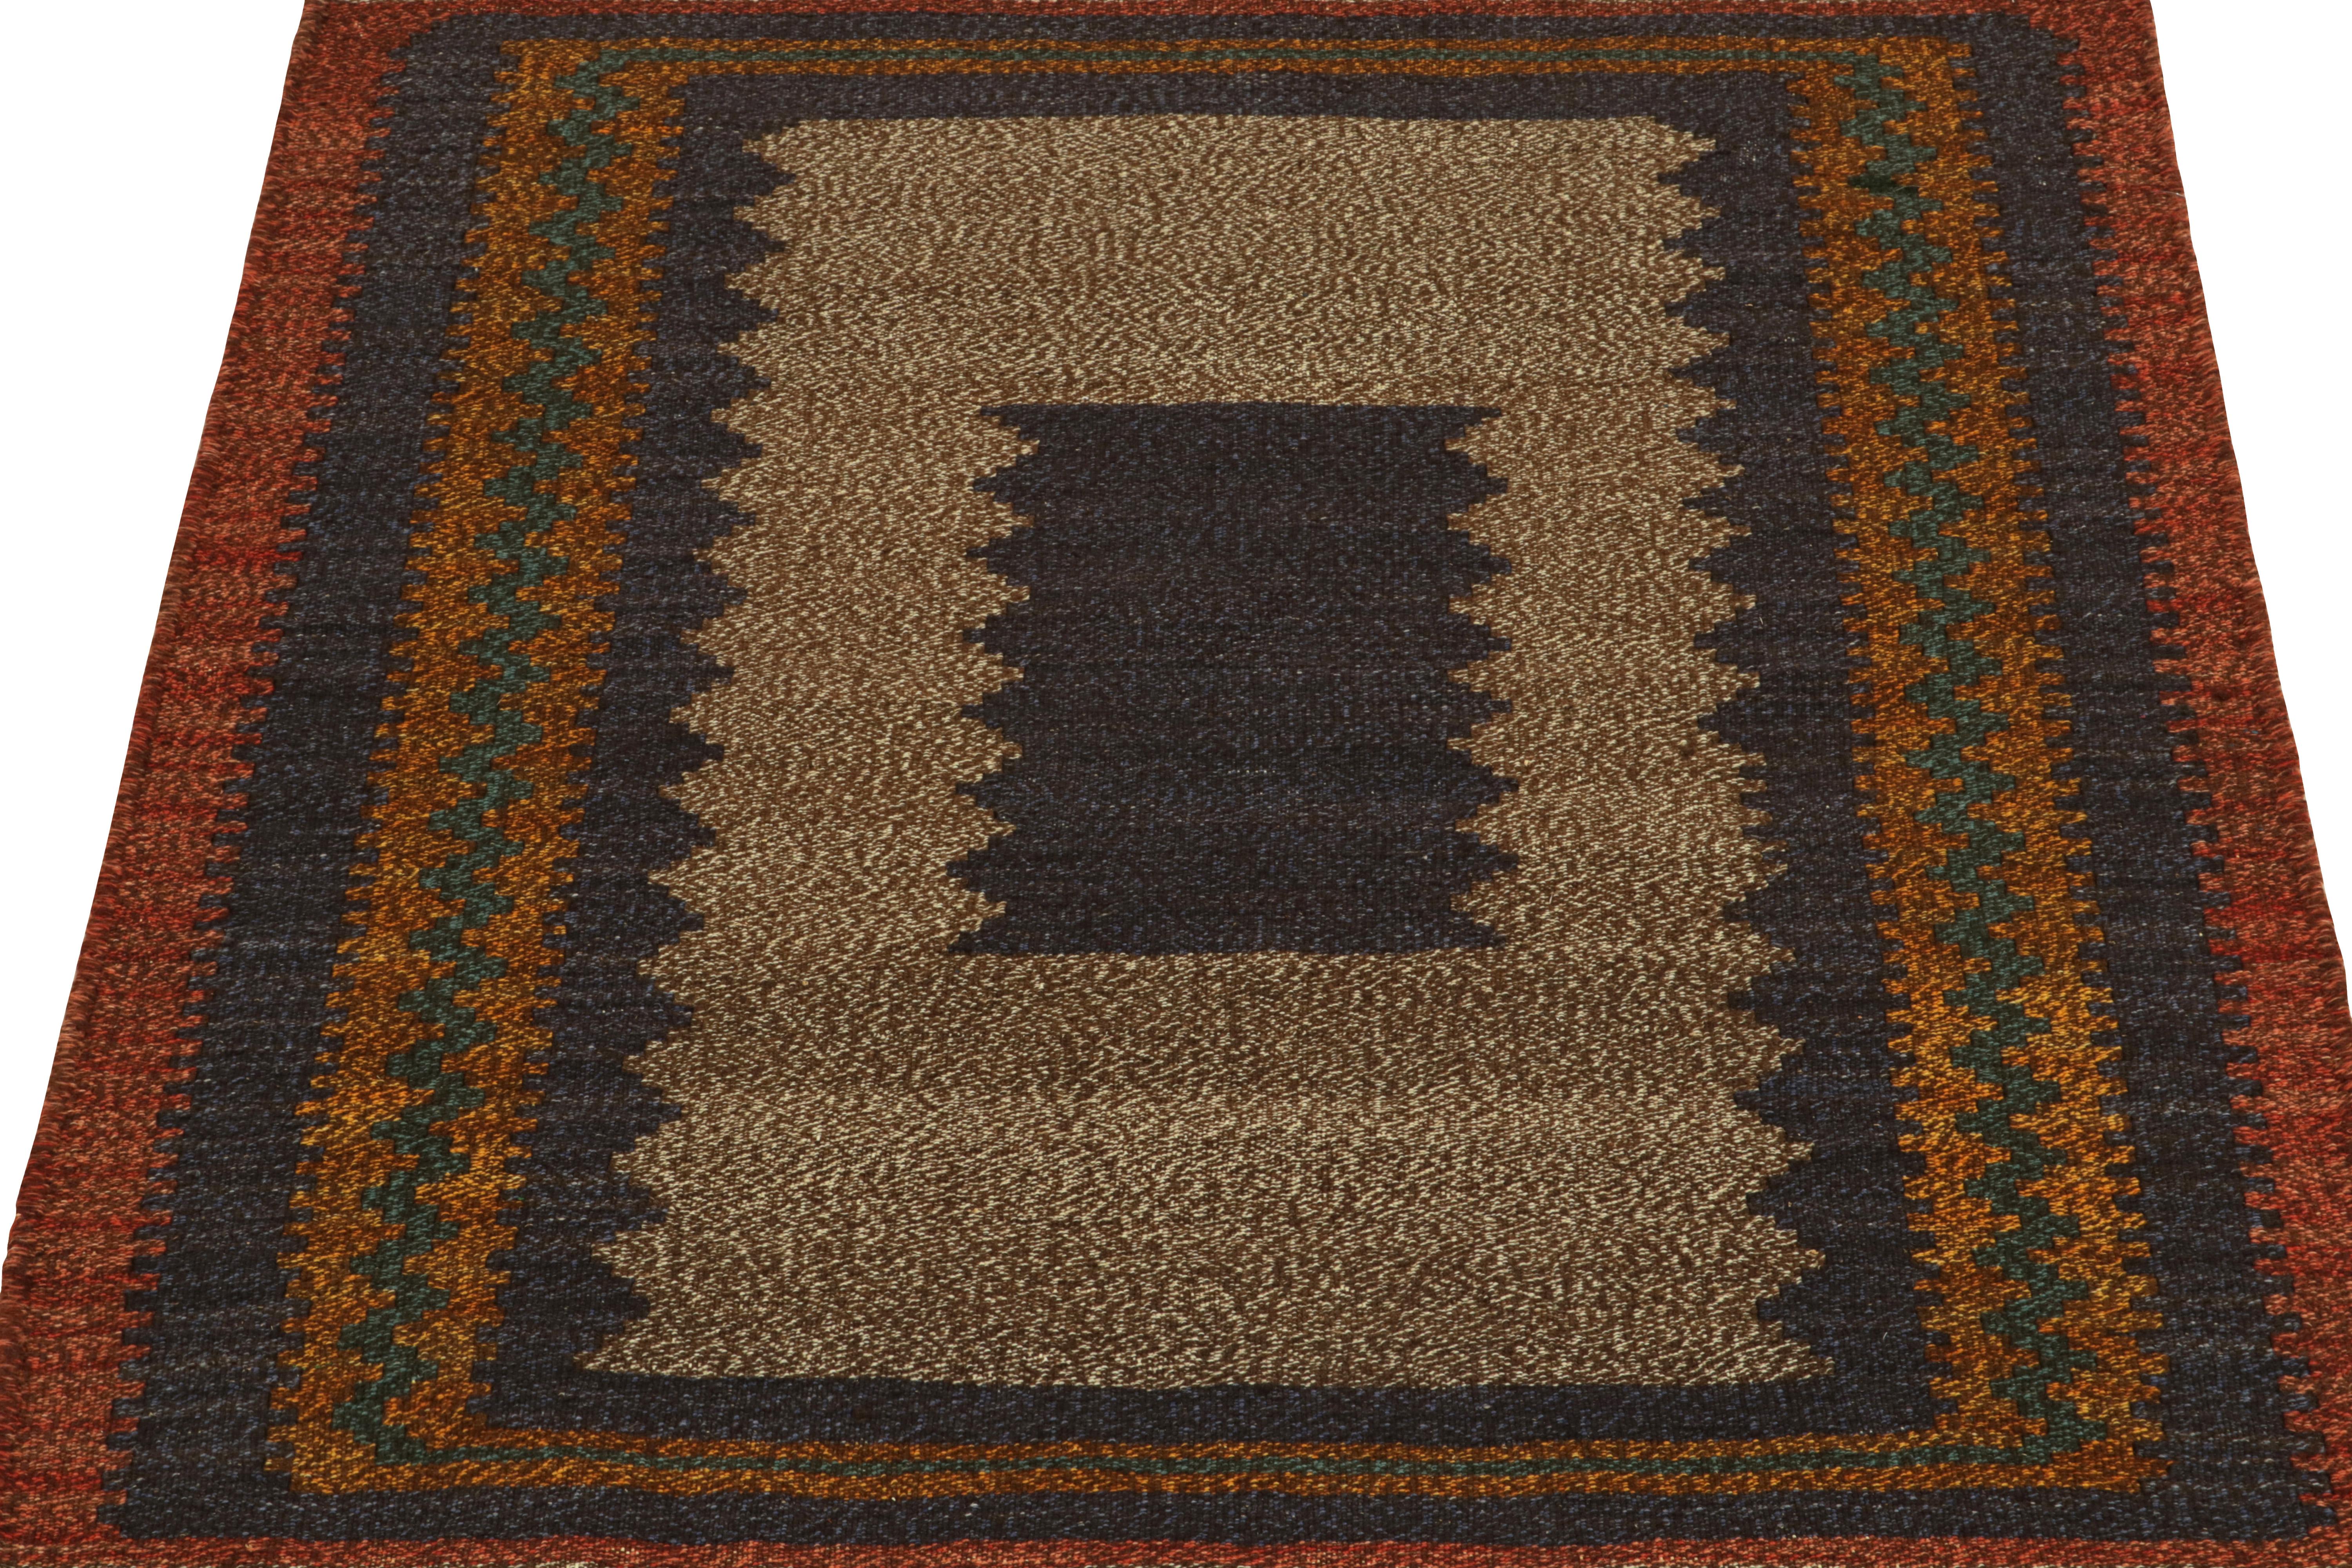 Handwoven in wool circa 1980-1990, from a rare vintage curation of small-sized Sofreh Kilim pieces joining our classic collections. Distinguished among similar Persian flat weaves in durability, 3x4 size, and progressive colorways among many